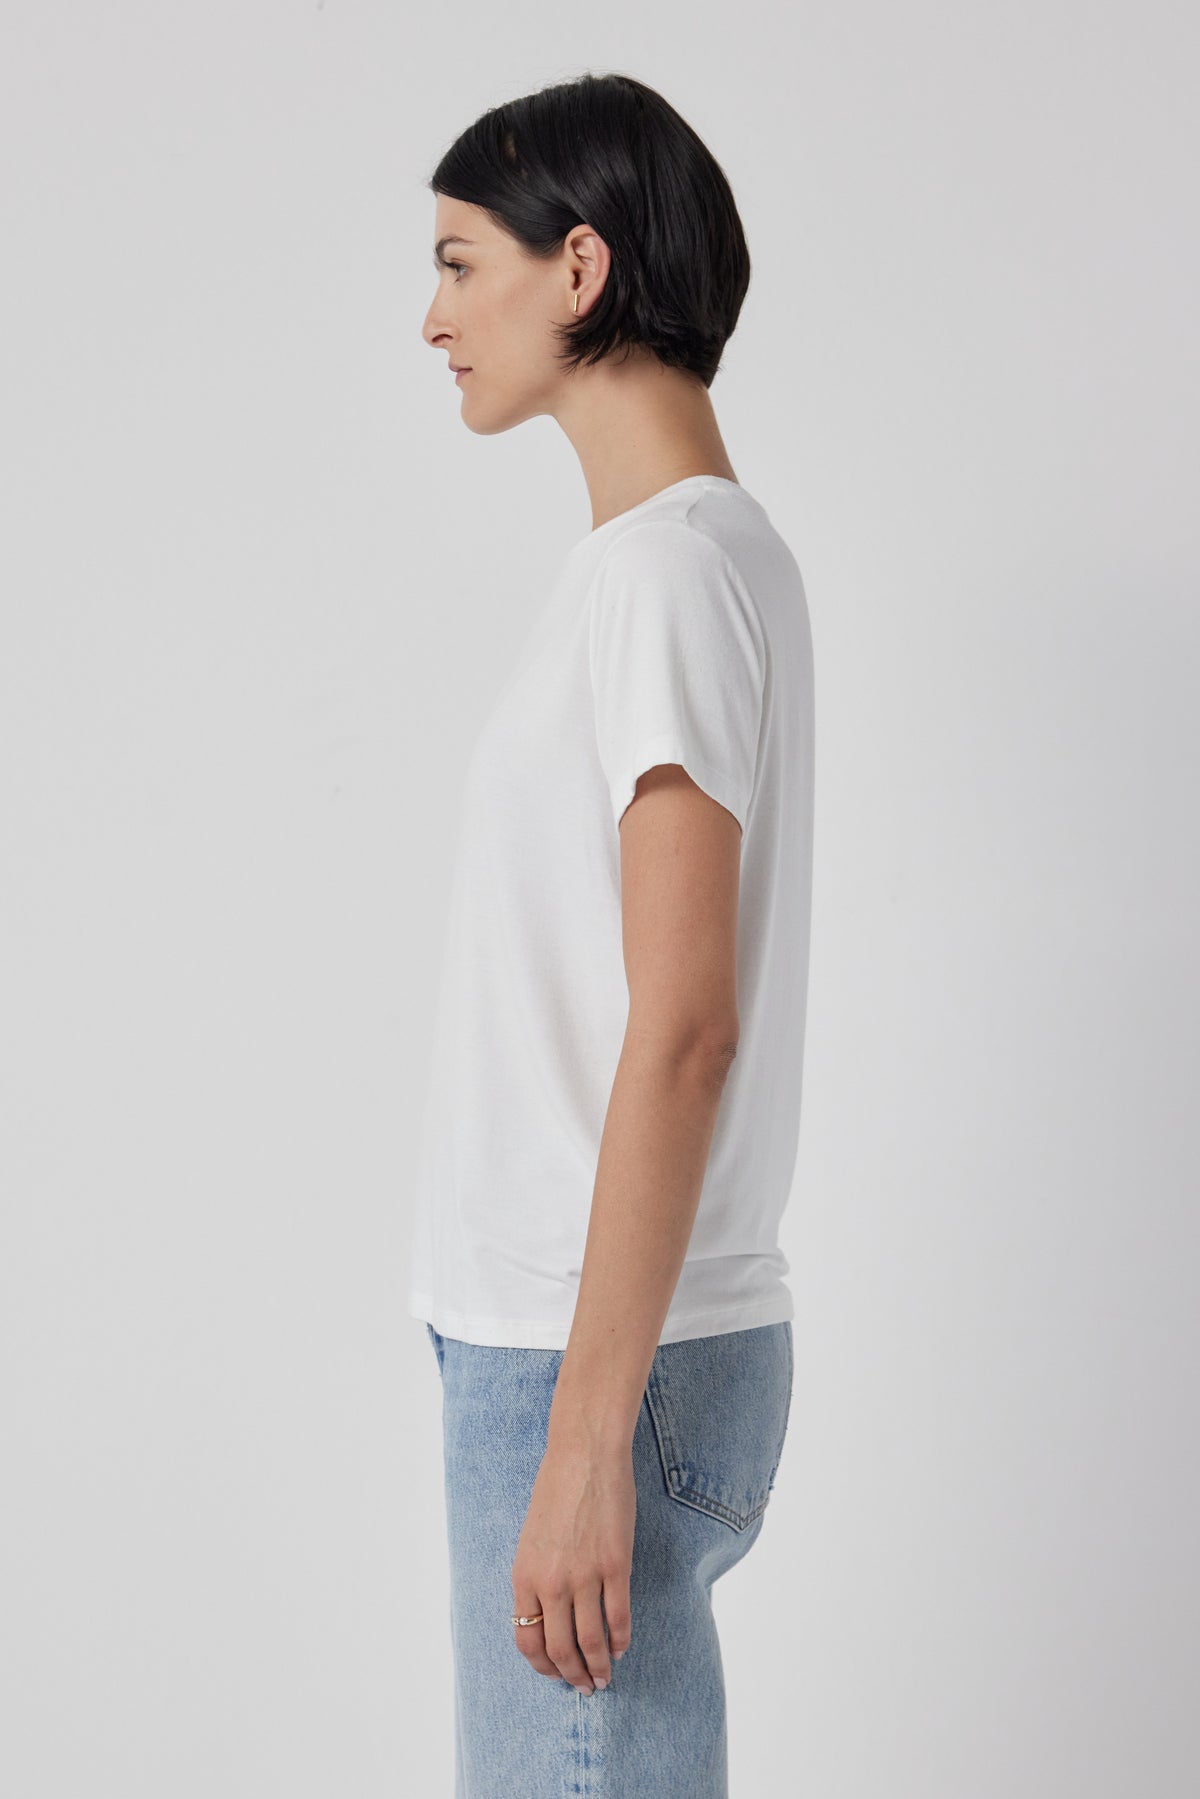 The woman is wearing a white Solana Tee by Velvet by Jenny Graham and jeans.-36002416820417